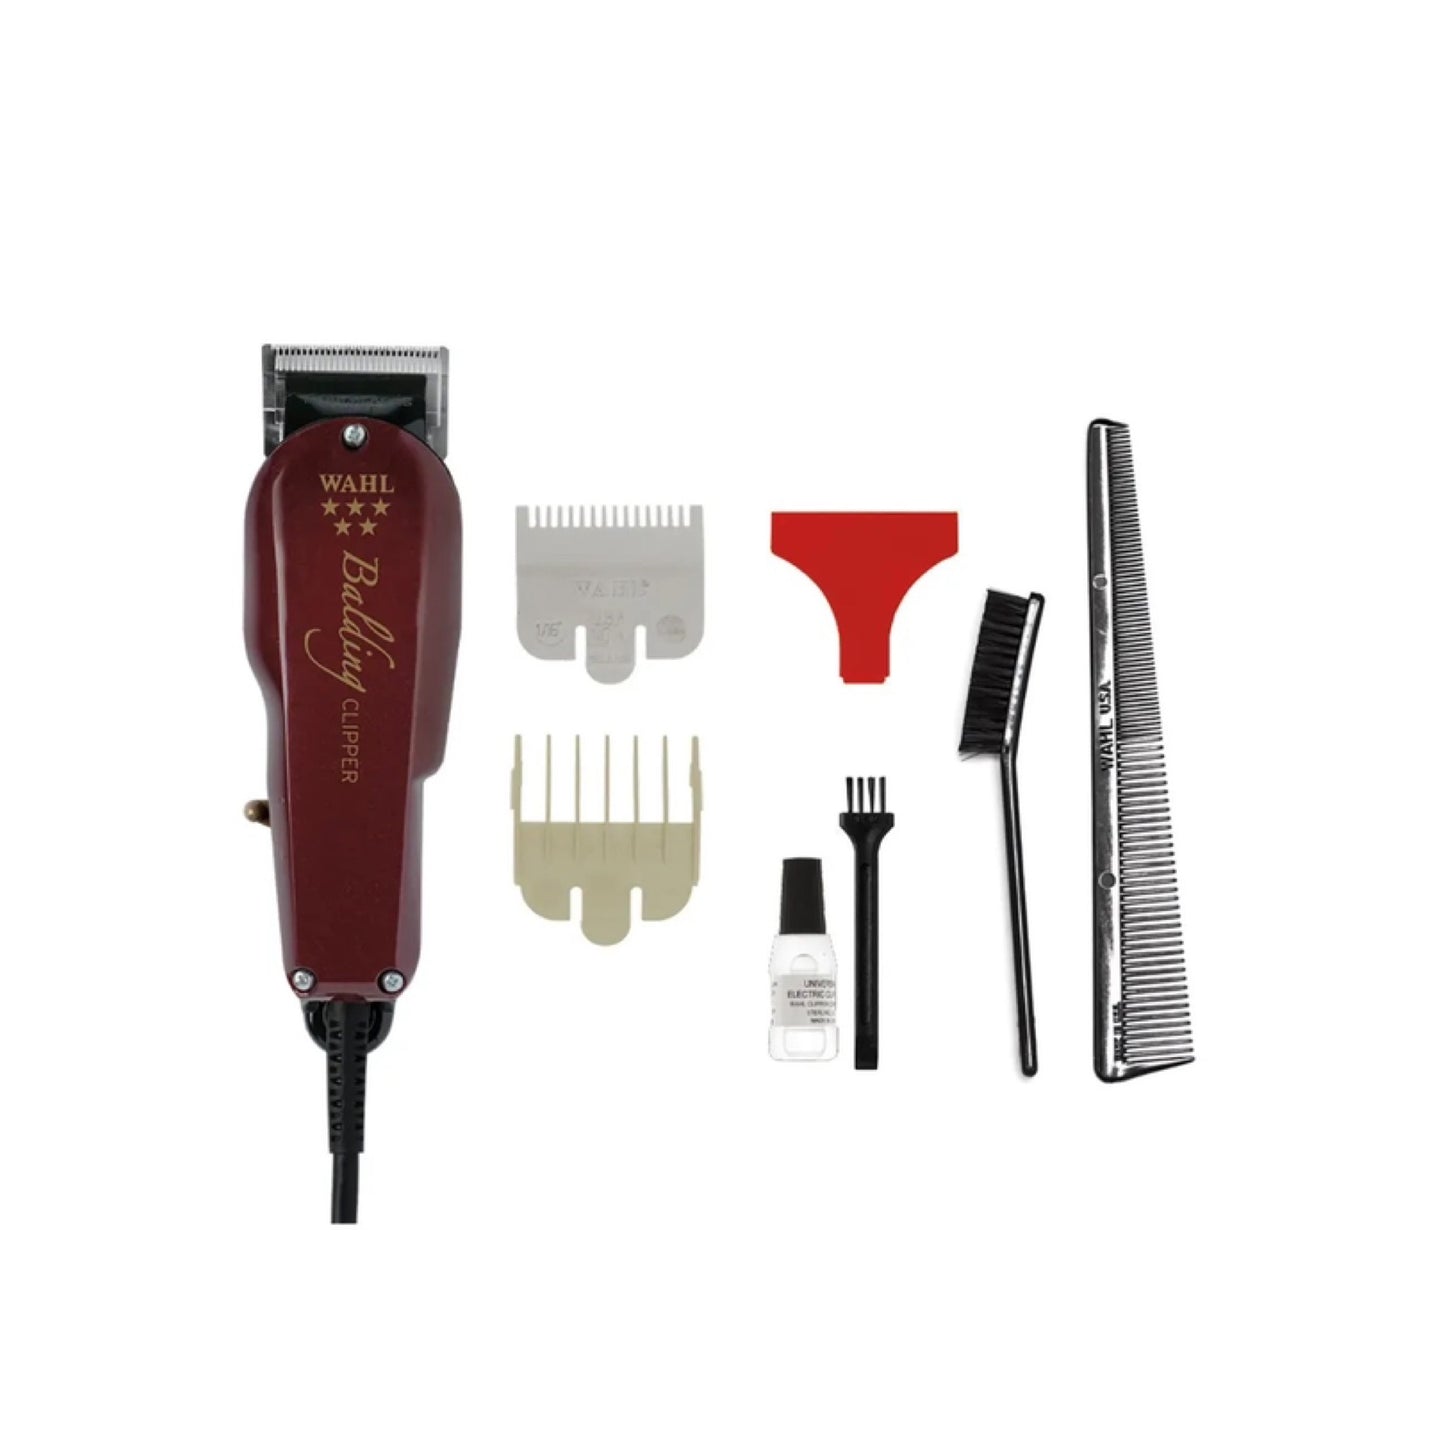 Wahl Balding Corded Clipper Kit